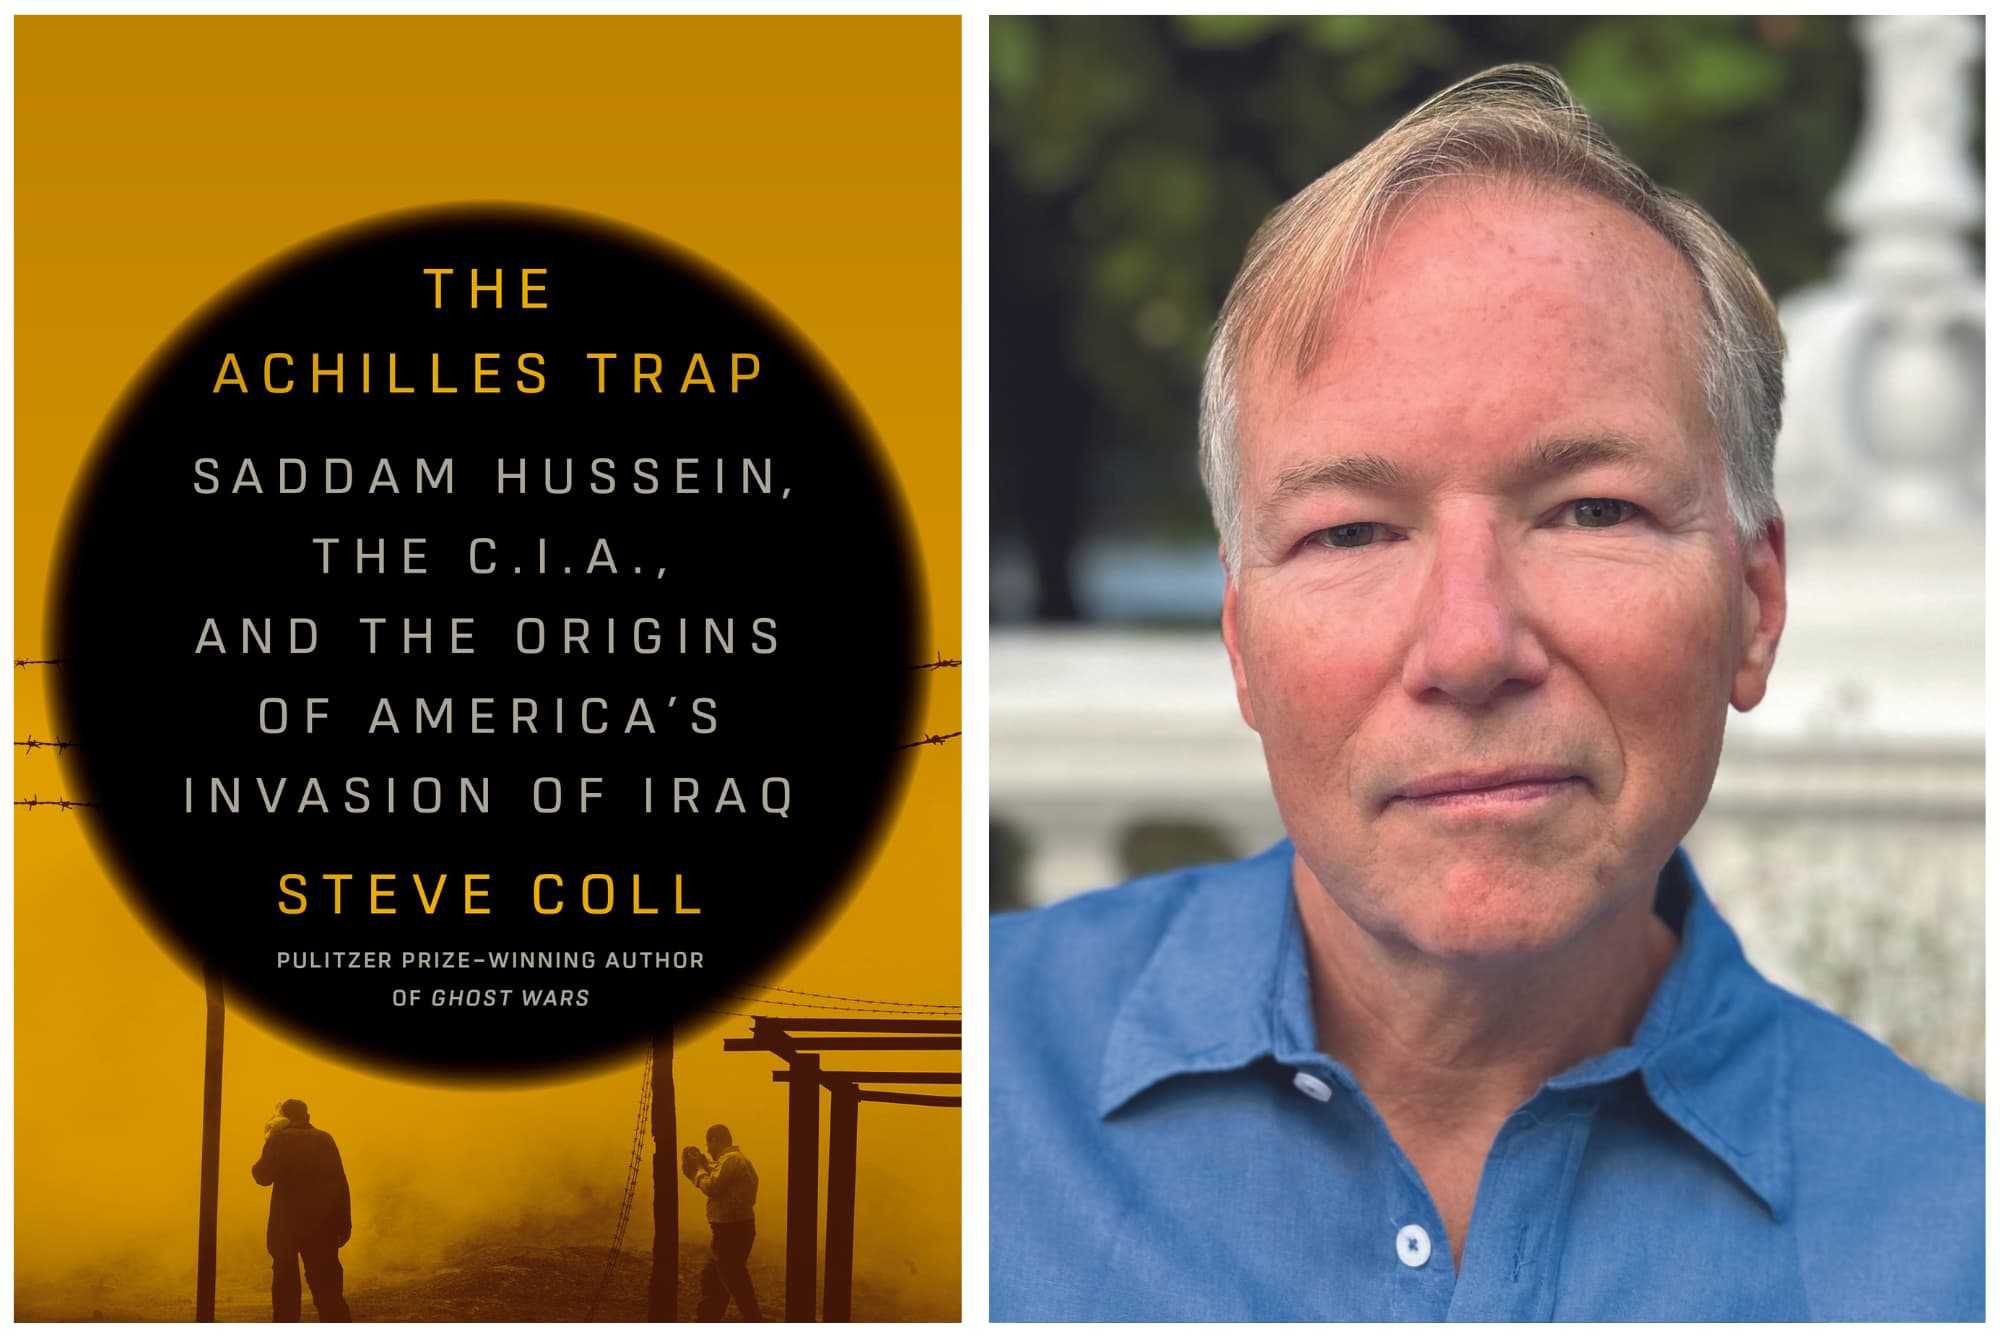 Cover of "The Achilles Trap," about the origins of the Iraq War, and headshot of author Steve Coll